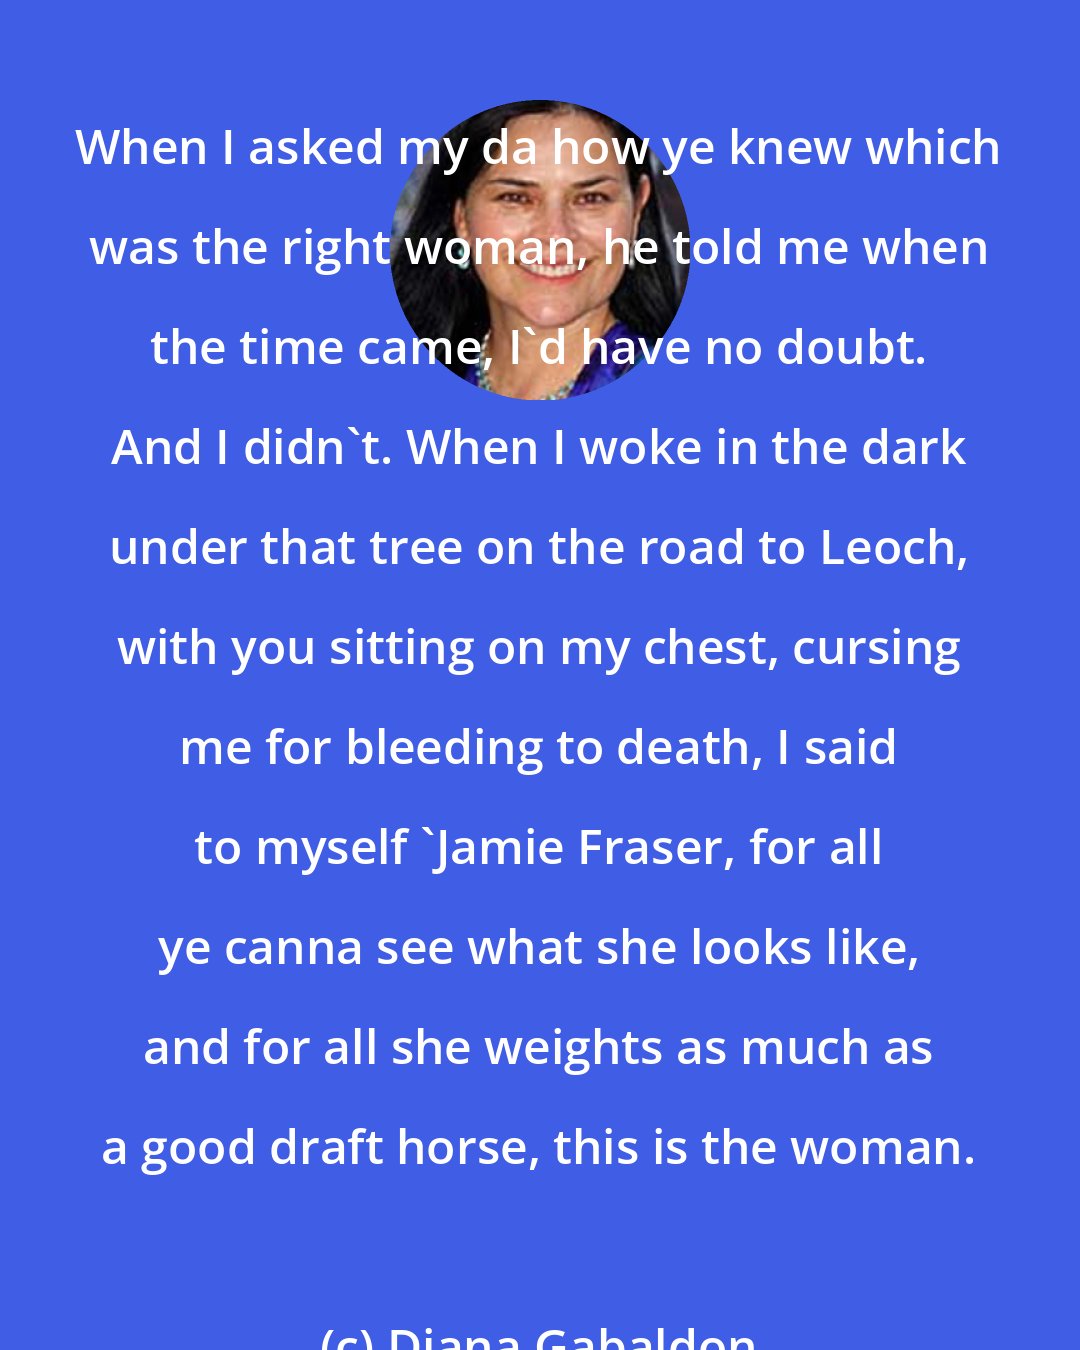 Diana Gabaldon: When I asked my da how ye knew which was the right woman, he told me when the time came, I'd have no doubt. And I didn't. When I woke in the dark under that tree on the road to Leoch, with you sitting on my chest, cursing me for bleeding to death, I said to myself 'Jamie Fraser, for all ye canna see what she looks like, and for all she weights as much as a good draft horse, this is the woman.